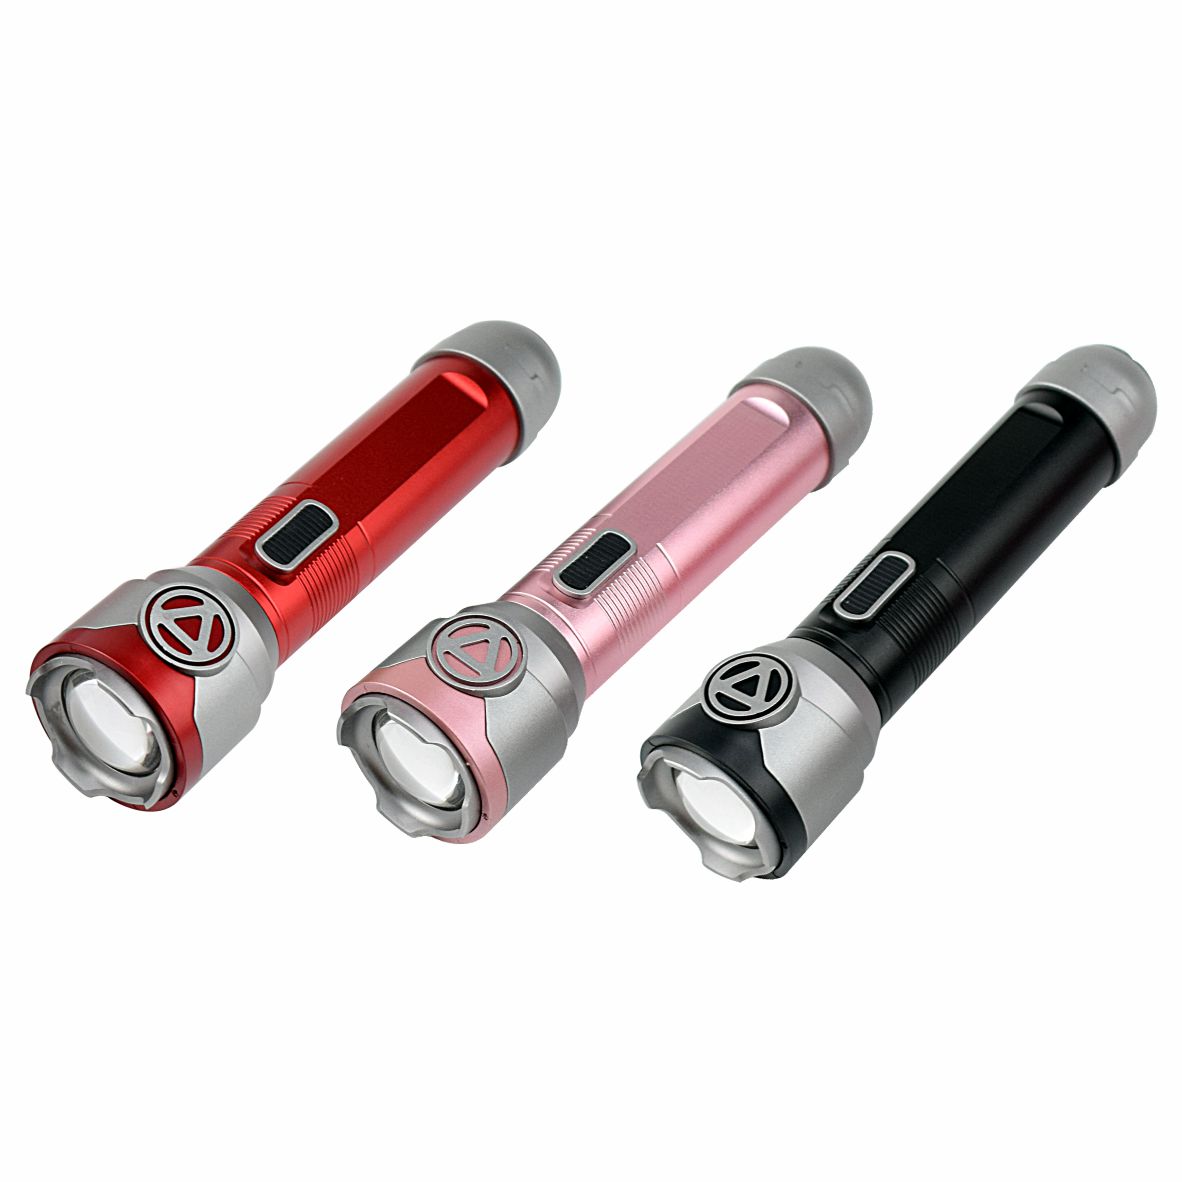 LED rechargeable battery aluminum alloy zoomable flashlight Outdoor waterproof emergency high powered lighting flashlight